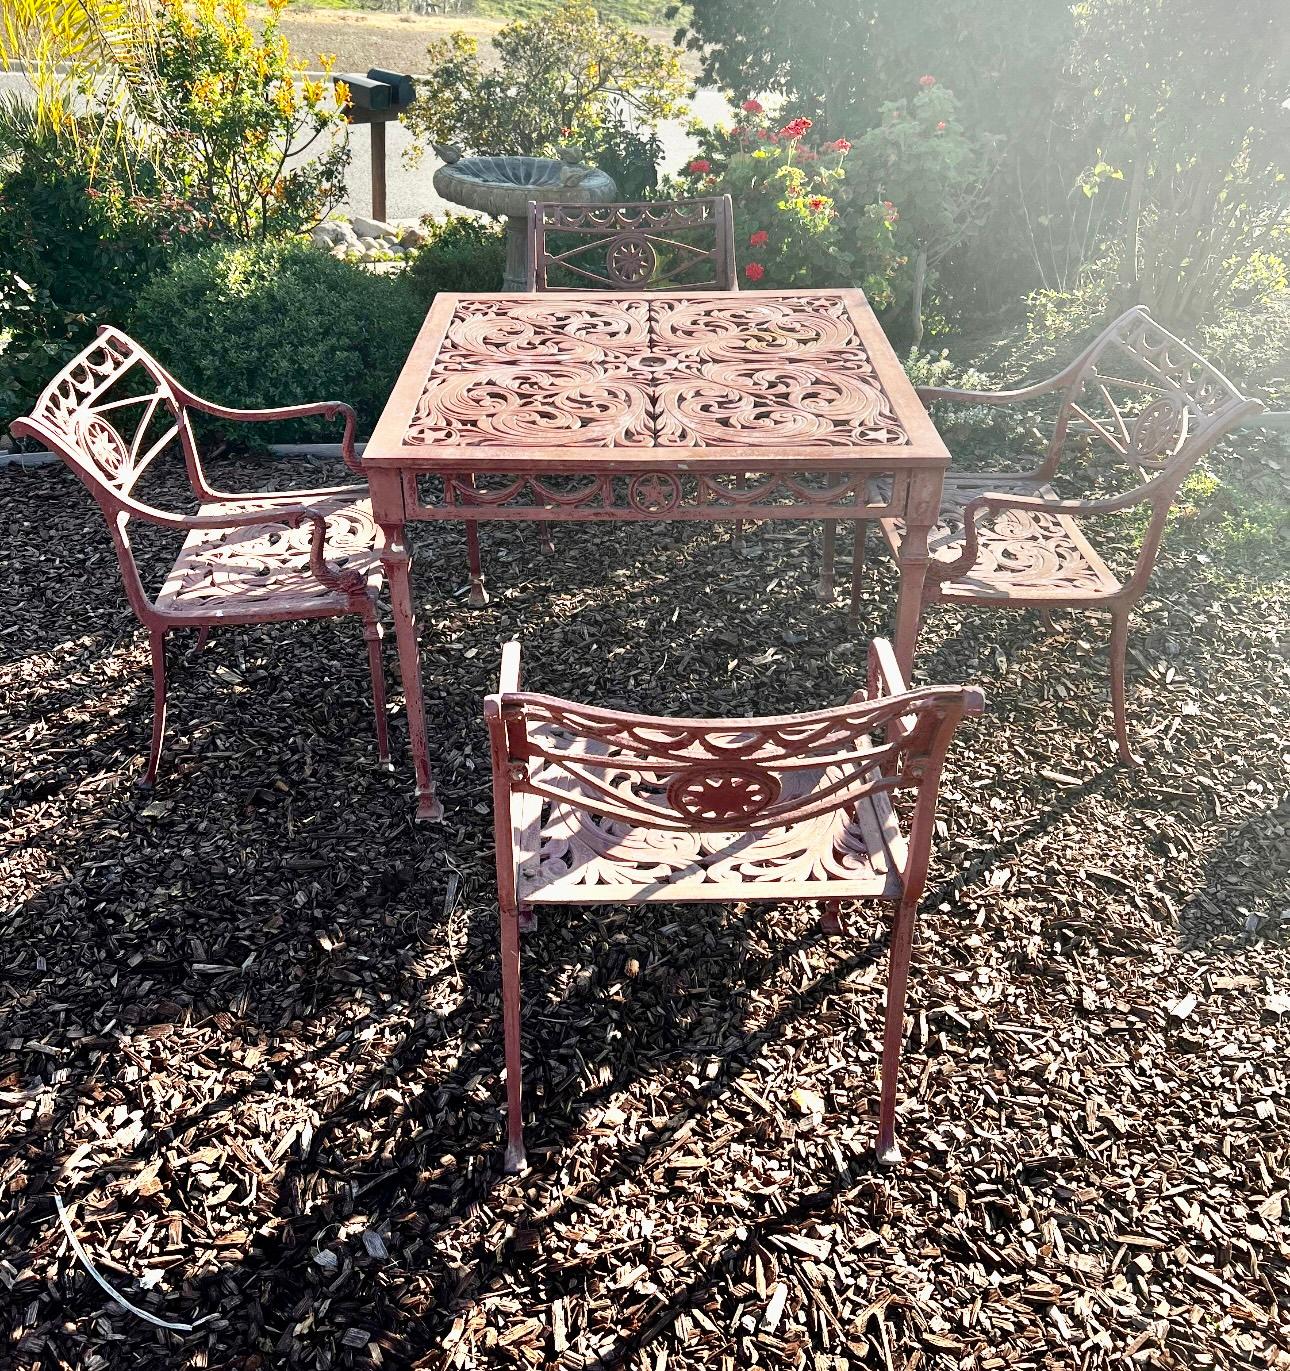 Kenneth Lynch & Sons Filigree Design
Star & Dolphin Dining st
Four arm chairs and table with opening for umbrella. c. 1950'd
OF THE PERIOD: Mid-Century Modern
MATERIALS: Cast aluminum
CONDITION: Good with paint chips as you see in pictures
Need to